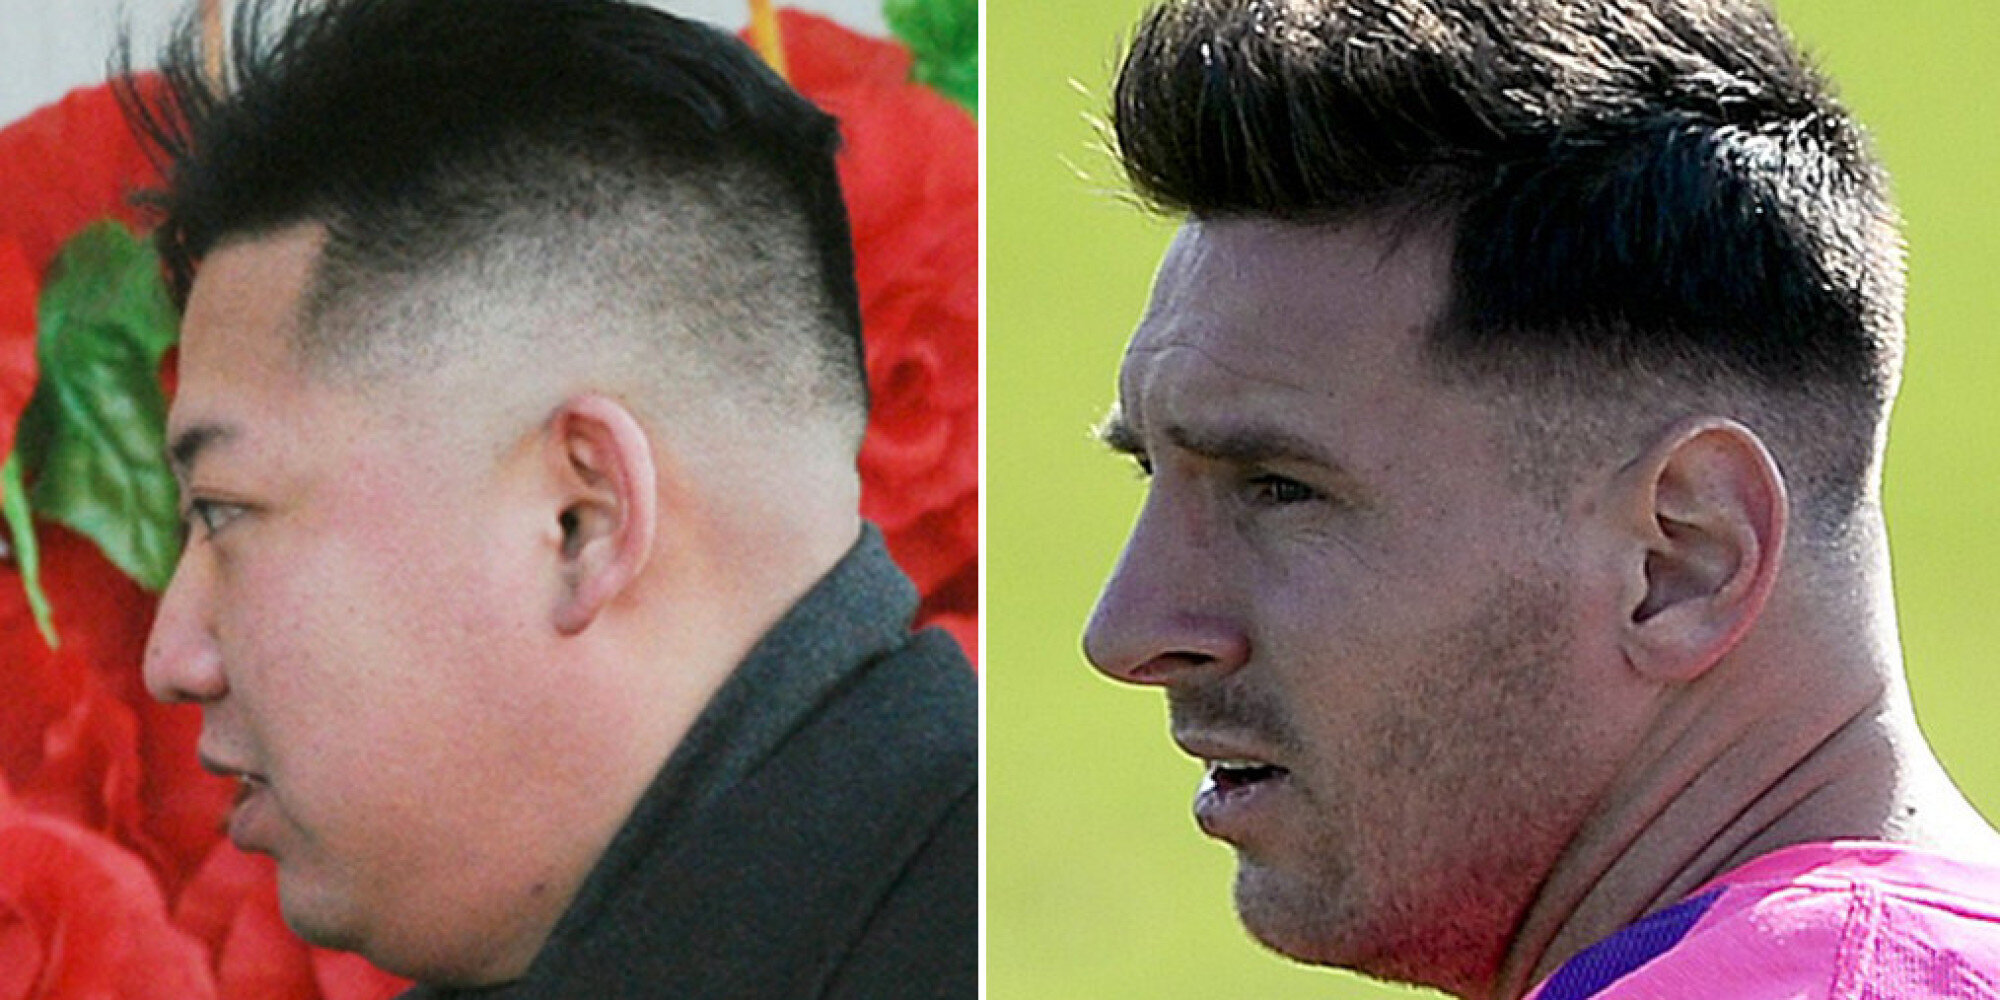 Fake news watch: That story about North Koreans being required to get Kim  Jong-un's haircut is probably a hoax.